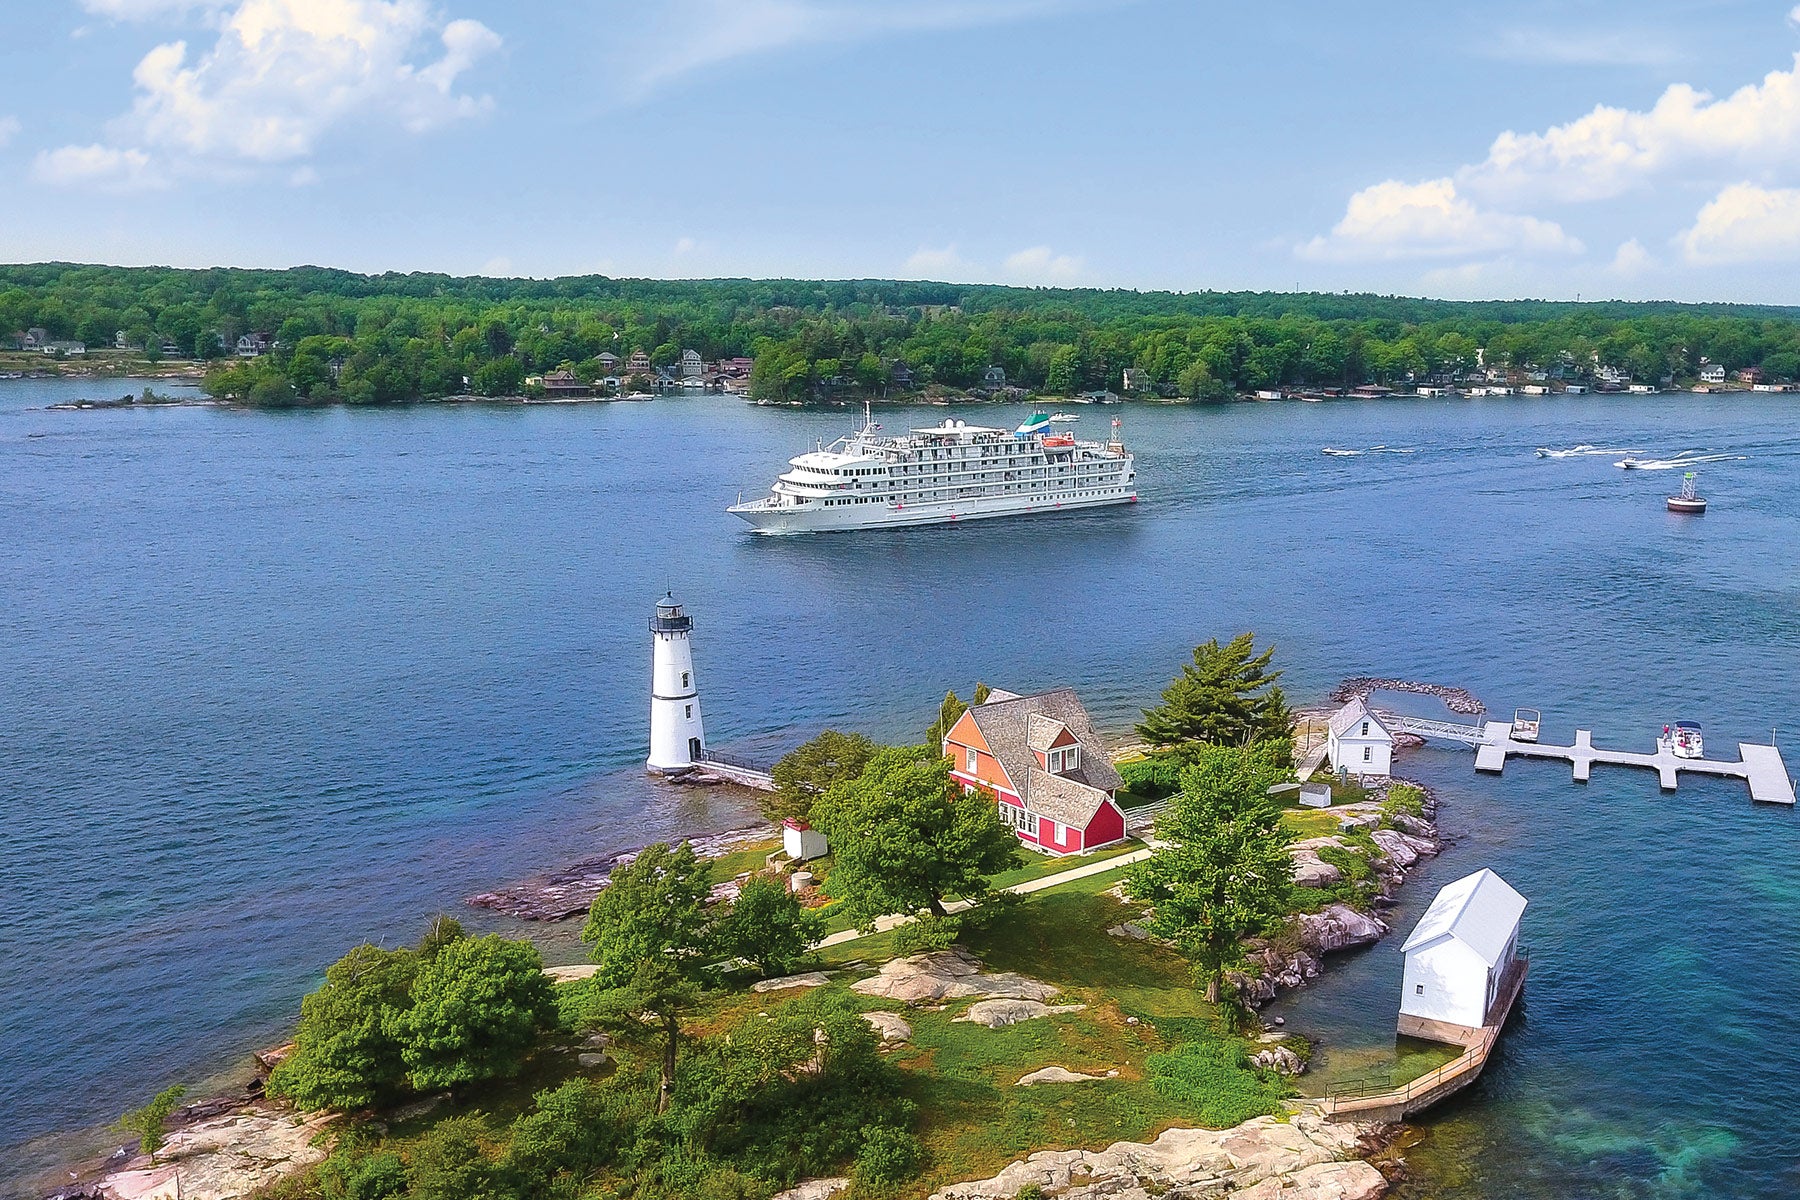 cruises on the great lakes